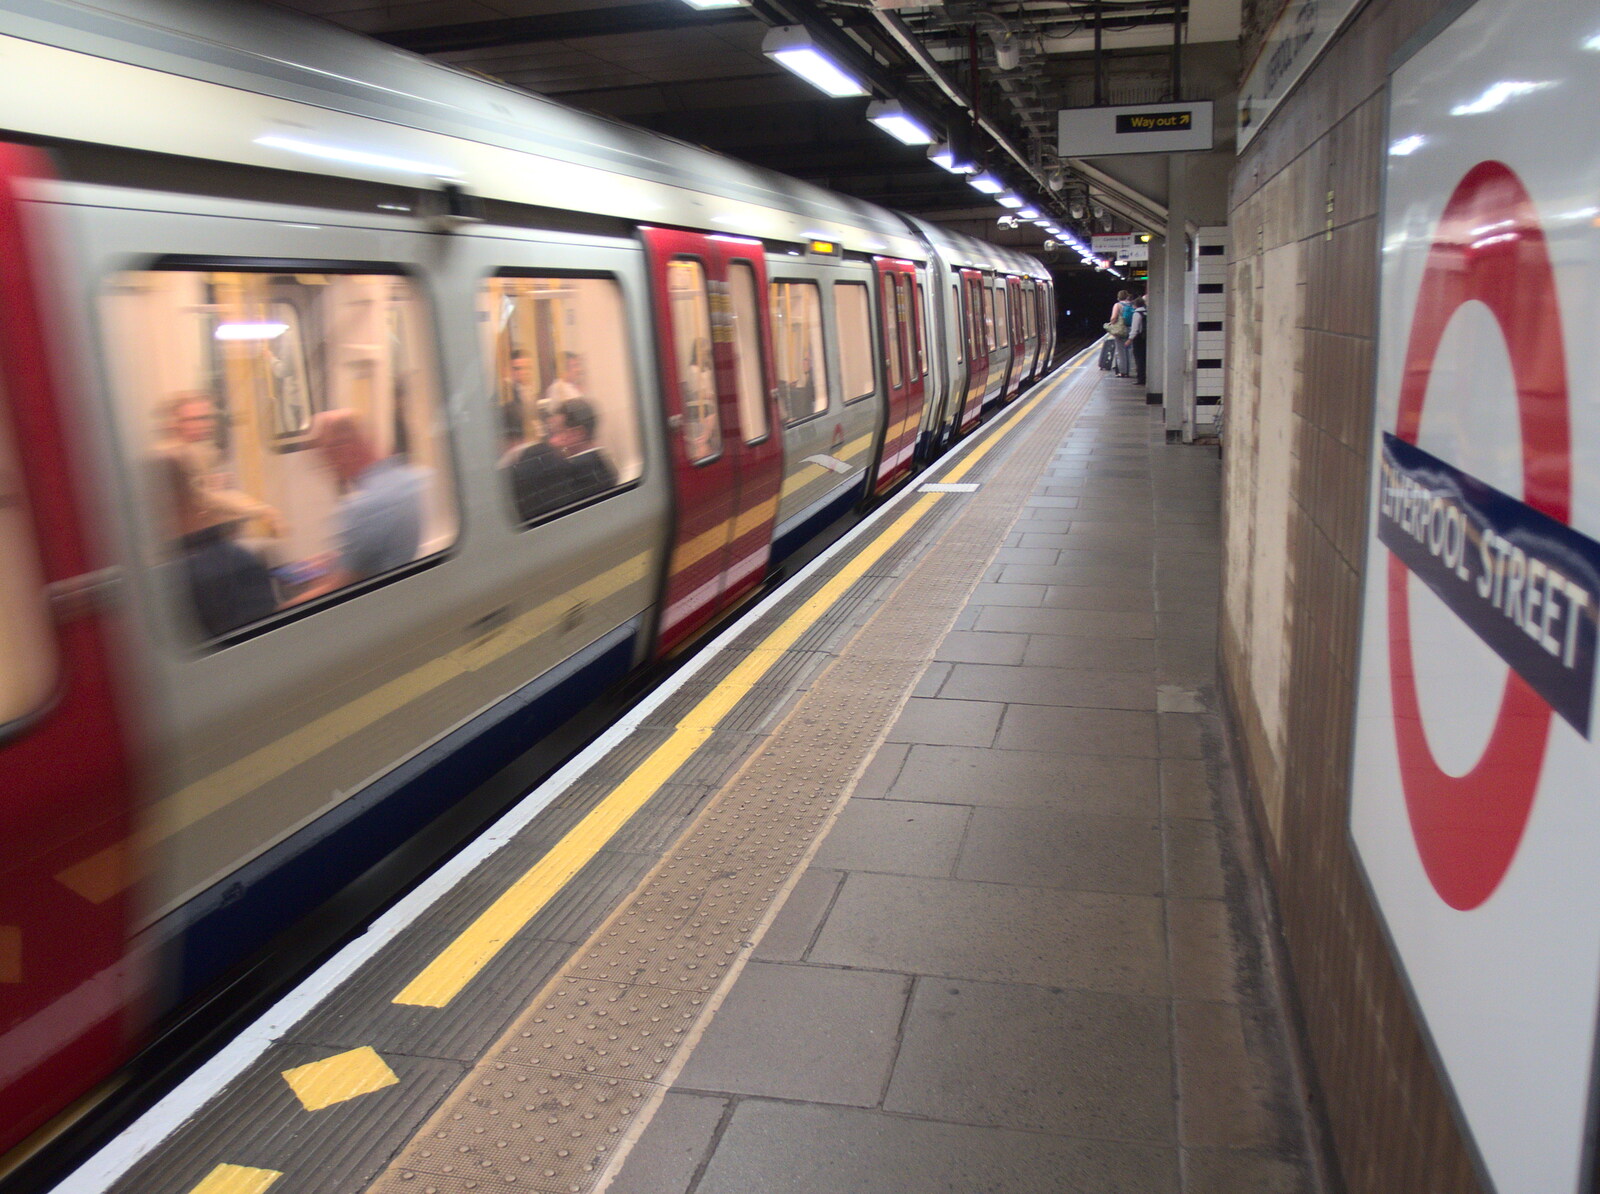 The tube pulls into Liverpool Street Underground from A SwiftKey Lunch, Porchester Place,  Edgware Road, London - 27th June 2018